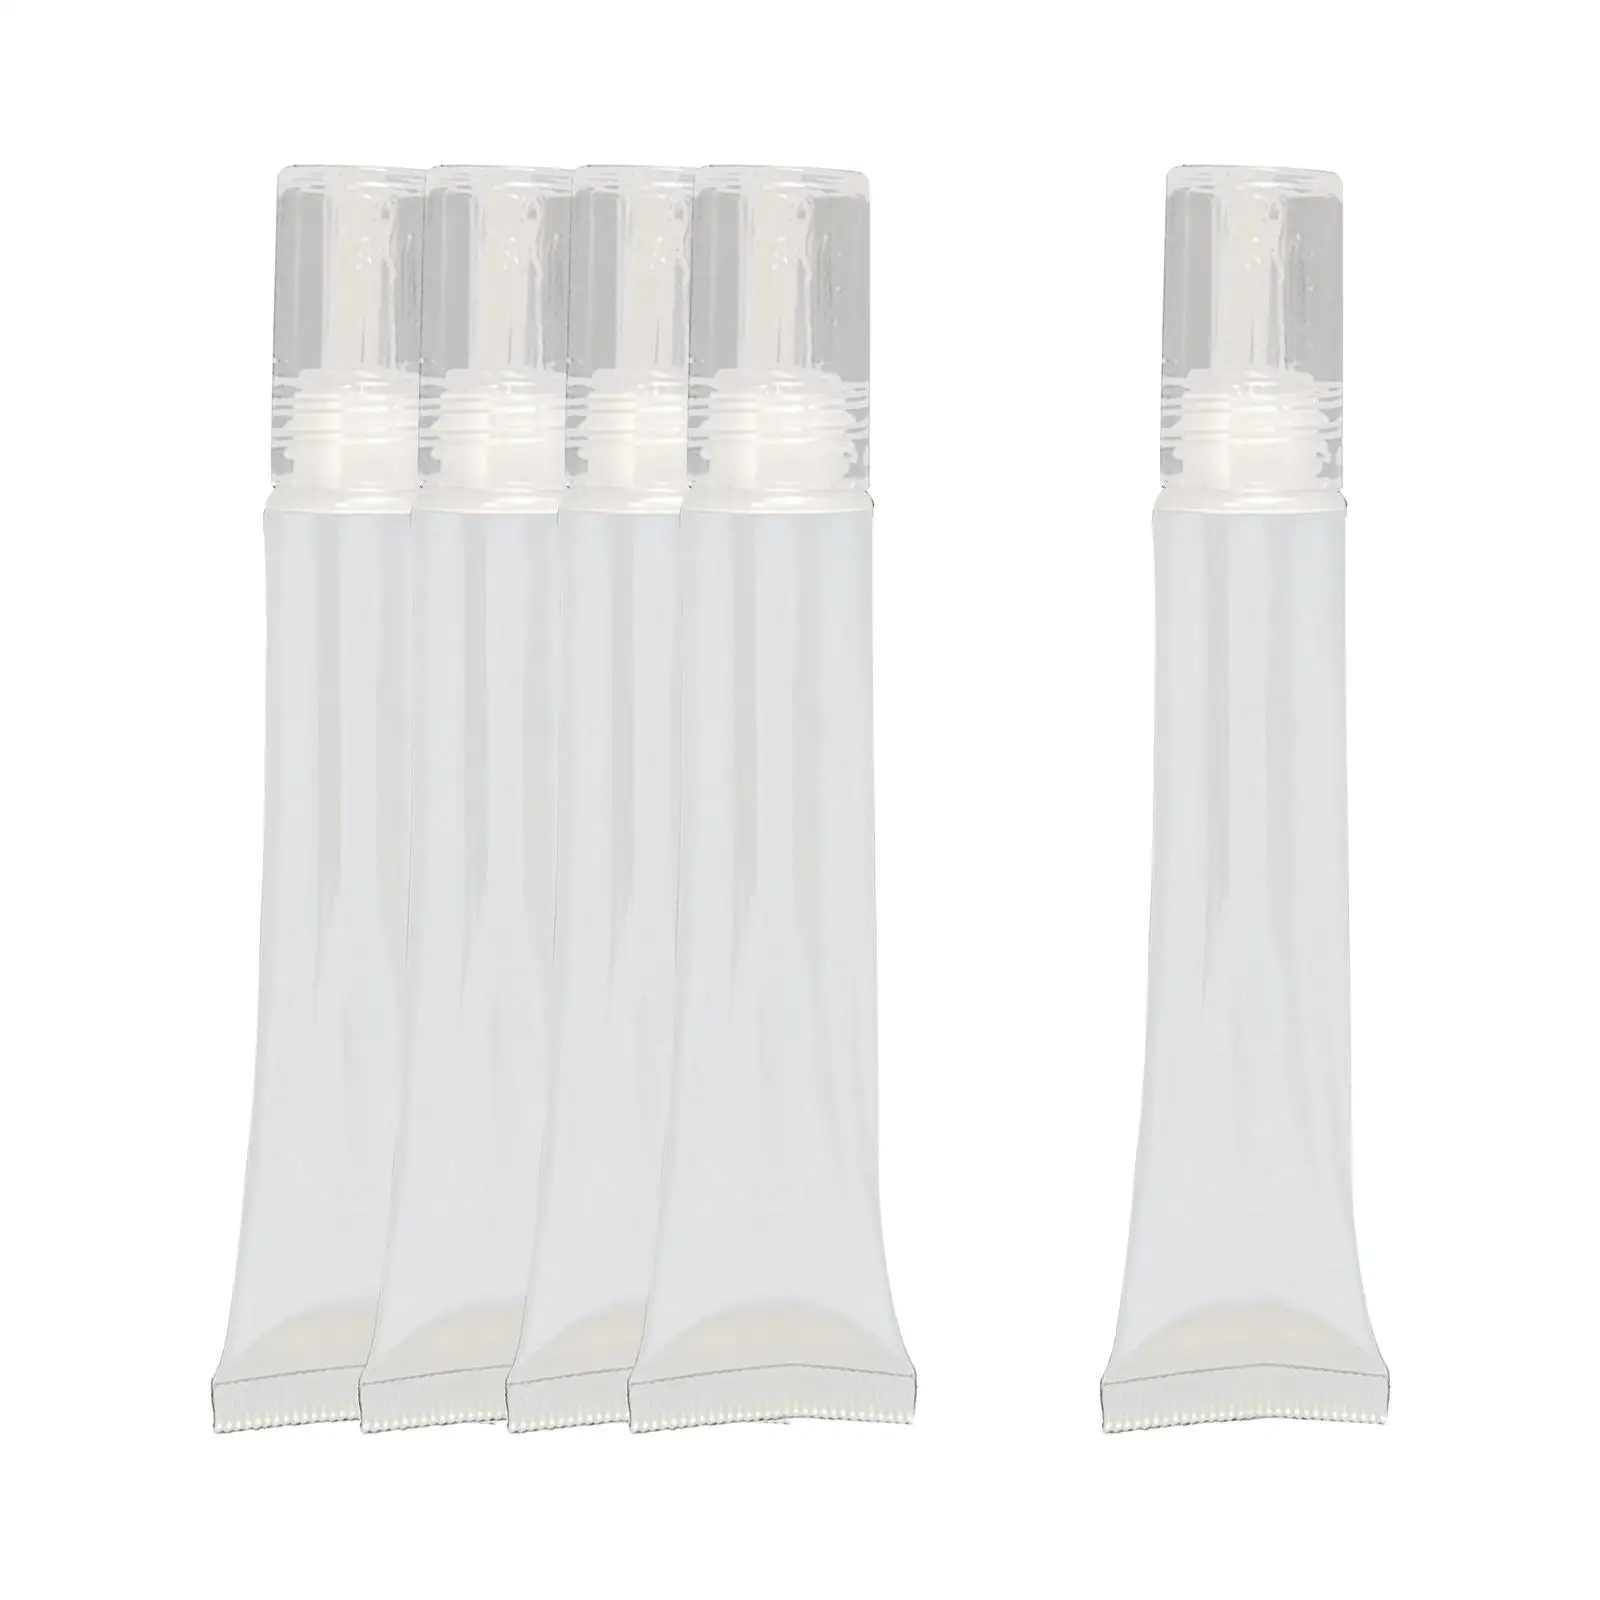 5 Pieces Cosmetic  with Cover Translucent Packing Storage Bottles for Facial Cleaning DIY  Balm 